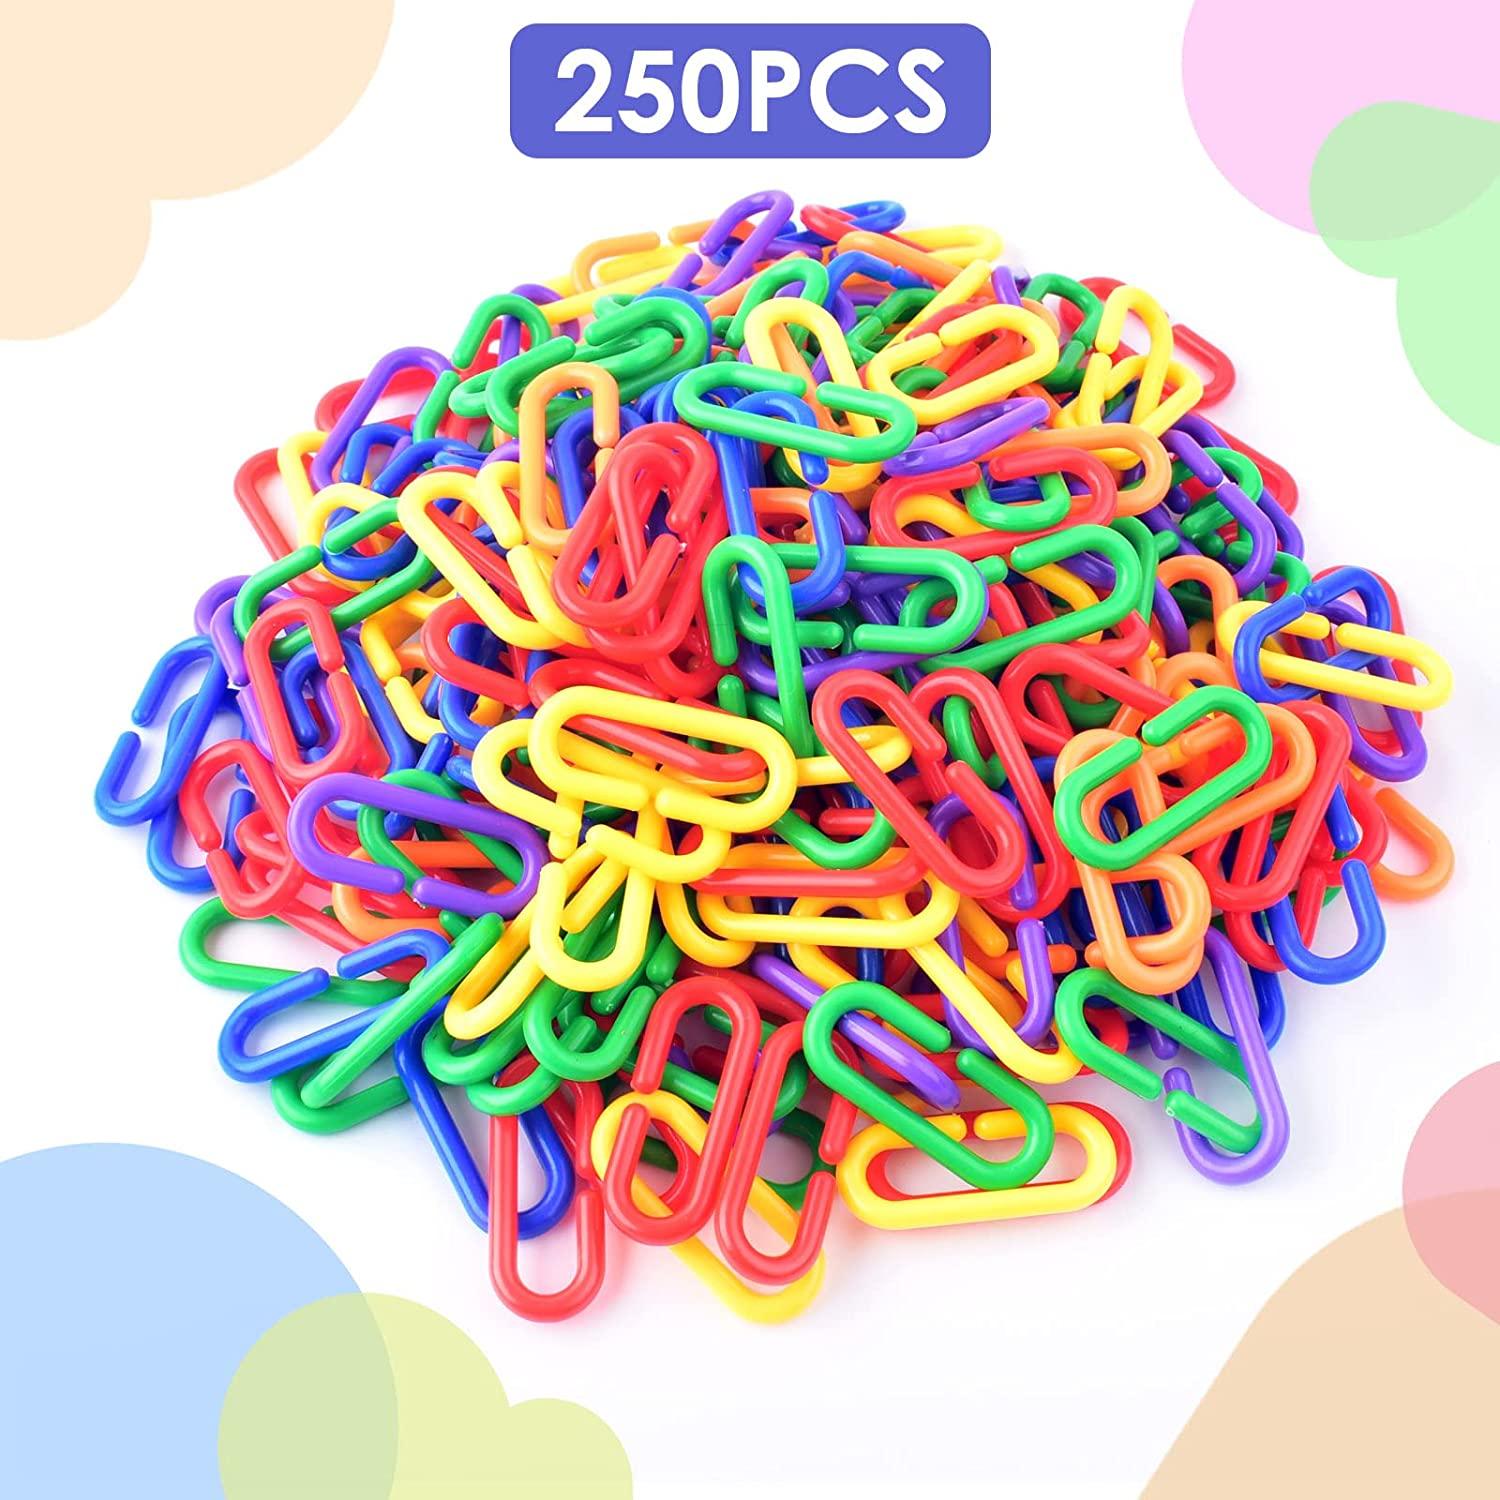 Bissap Plastic Chain Links Birds 250pcs, Mix Color Rainbow DIY C-Clips  Chains Hooks Swing Climbing Cage Toys for Sugar Glider Rat Parrot Bird,  Children's Learning Toy